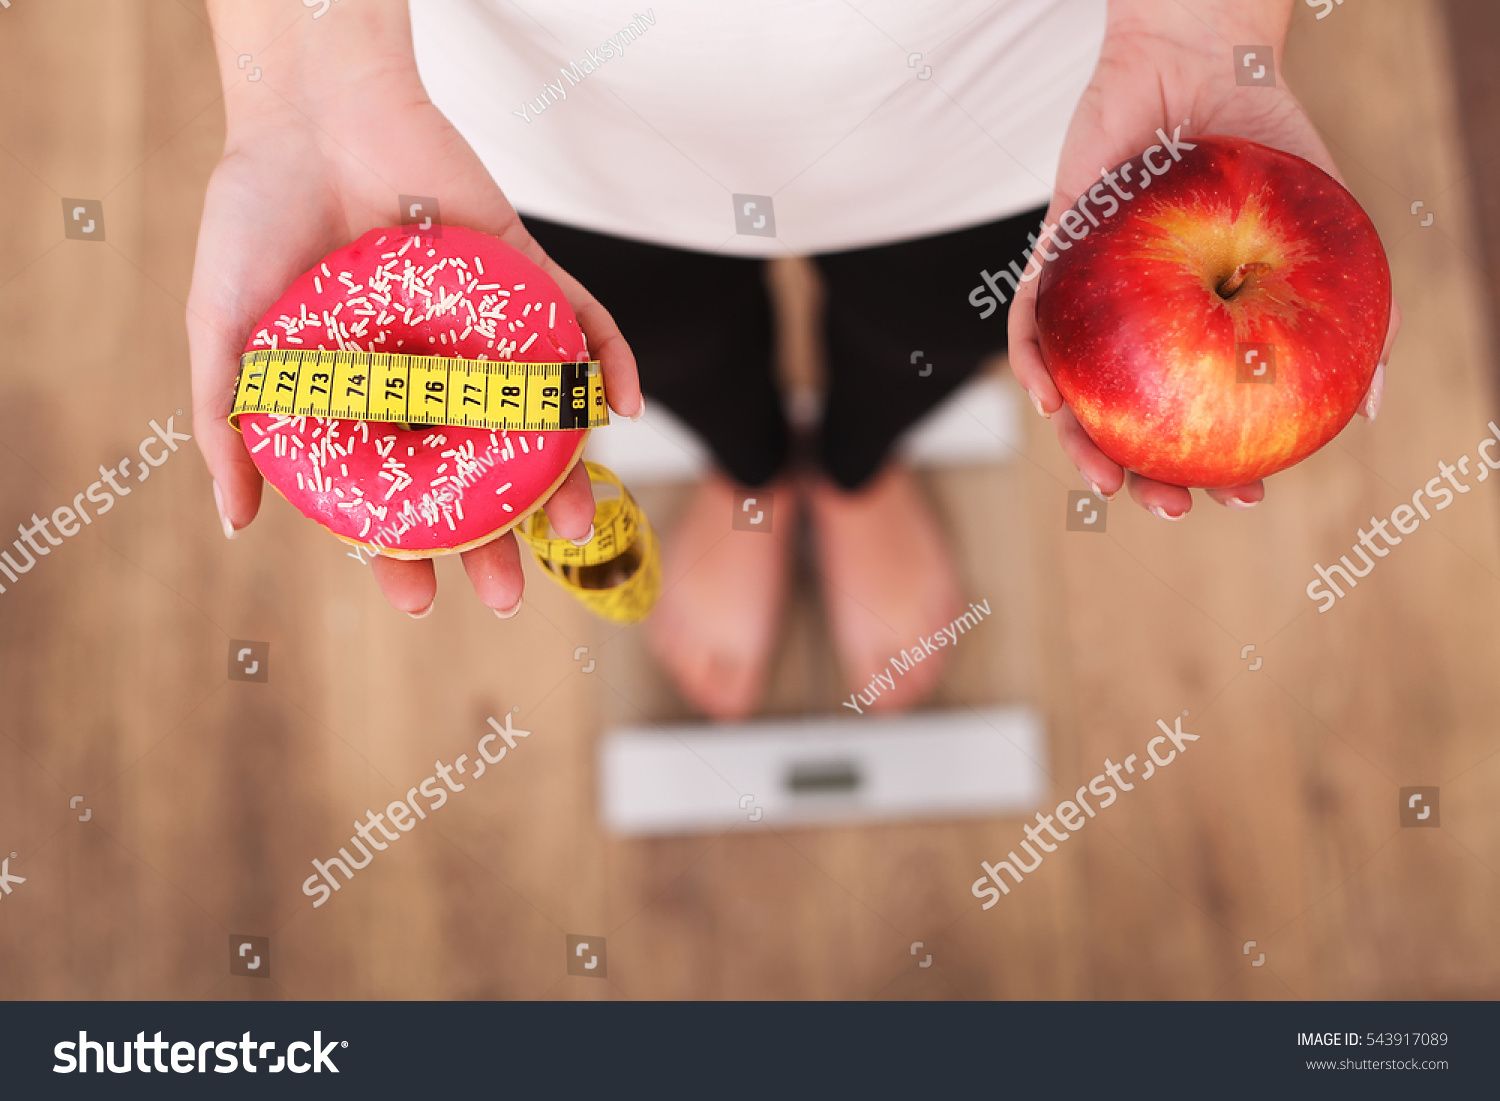 Diet. Woman Measuring Body Weight On Weighing Scale Holding Donut and apple. Sweets Are Unhealthy Junk Food. Dieting, Healthy Eating, Lifestyle. Weight Loss. Obesity. Top View #543917089